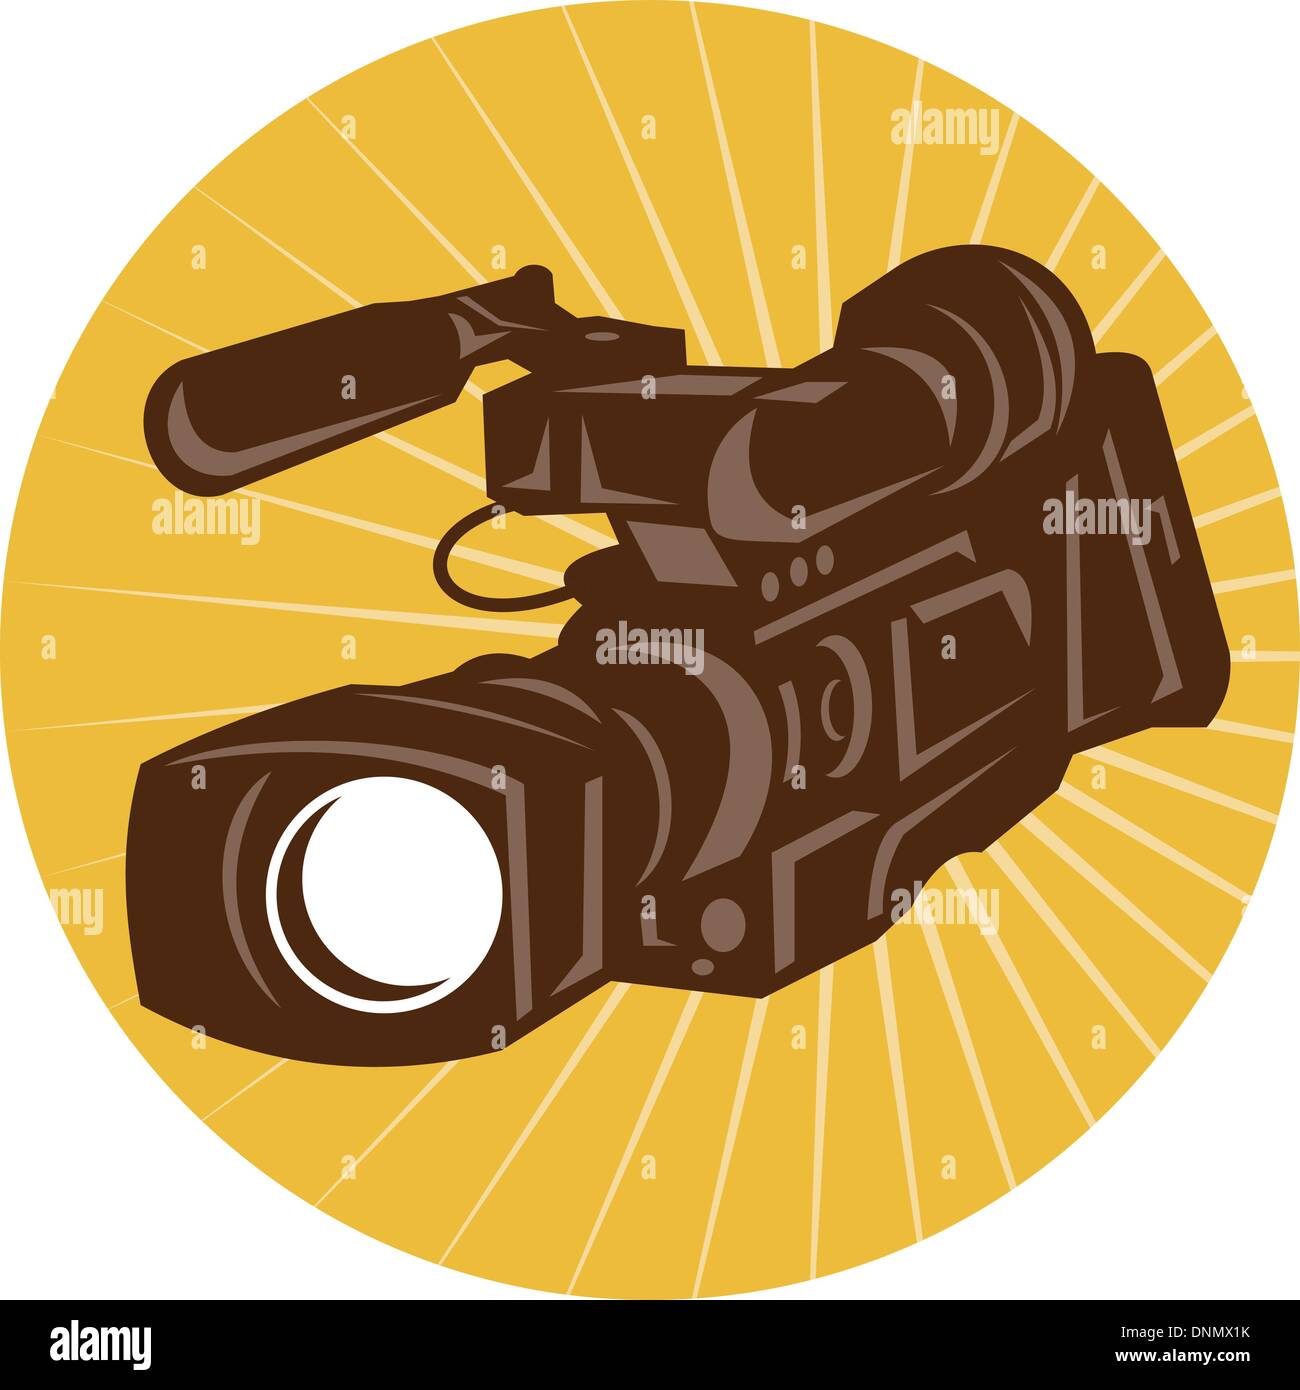 Illustration of a professional video camera camcorder recorder done in retro style set inside circle. Stock Vector